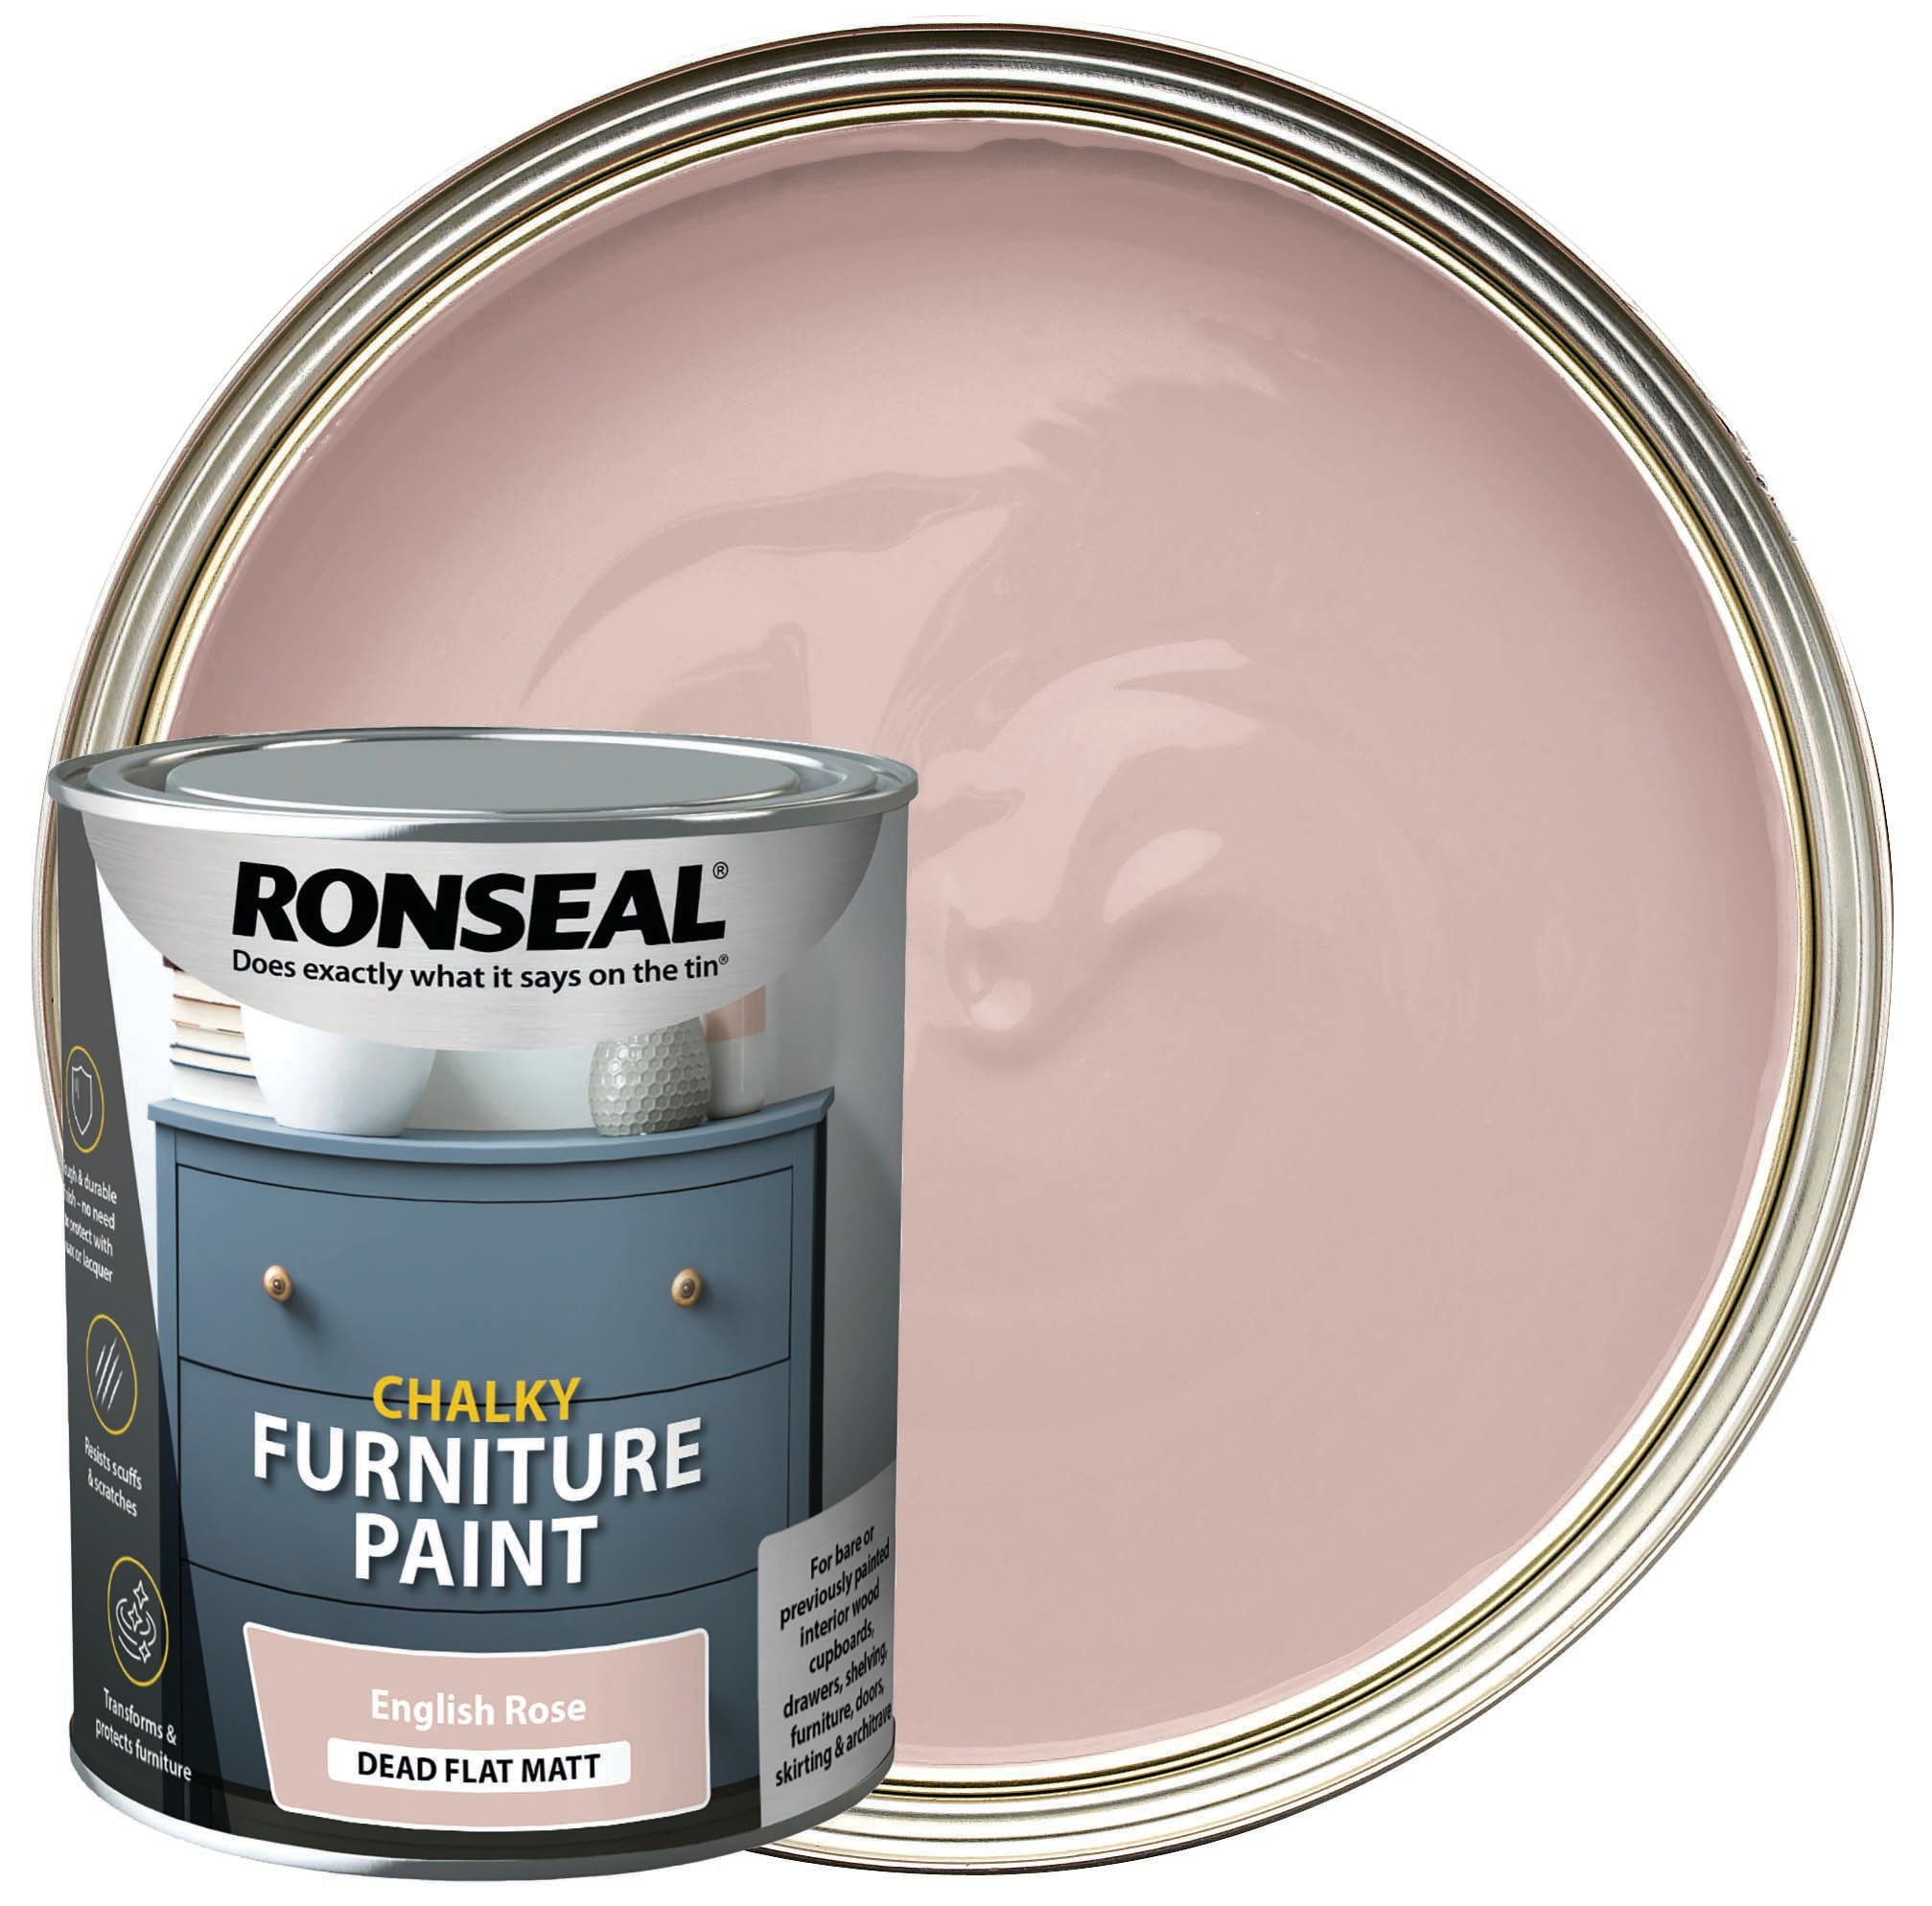 Ronseal Chalky Furniture Paint - English Rose -